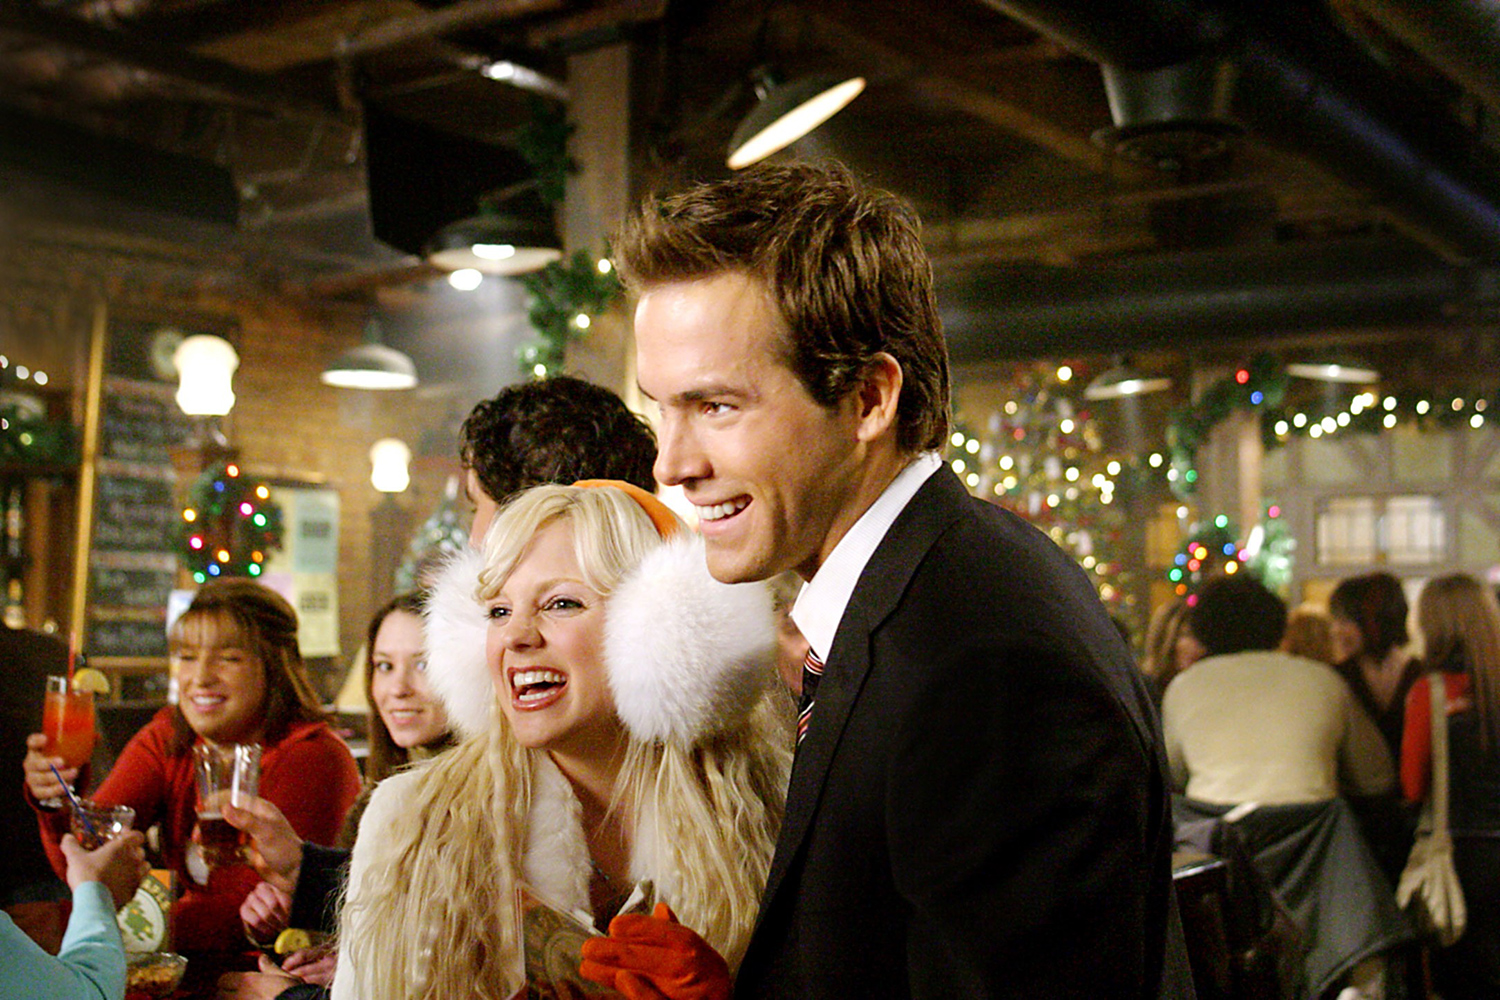 Just Friends: A Highly Underrated Christmas Movie!